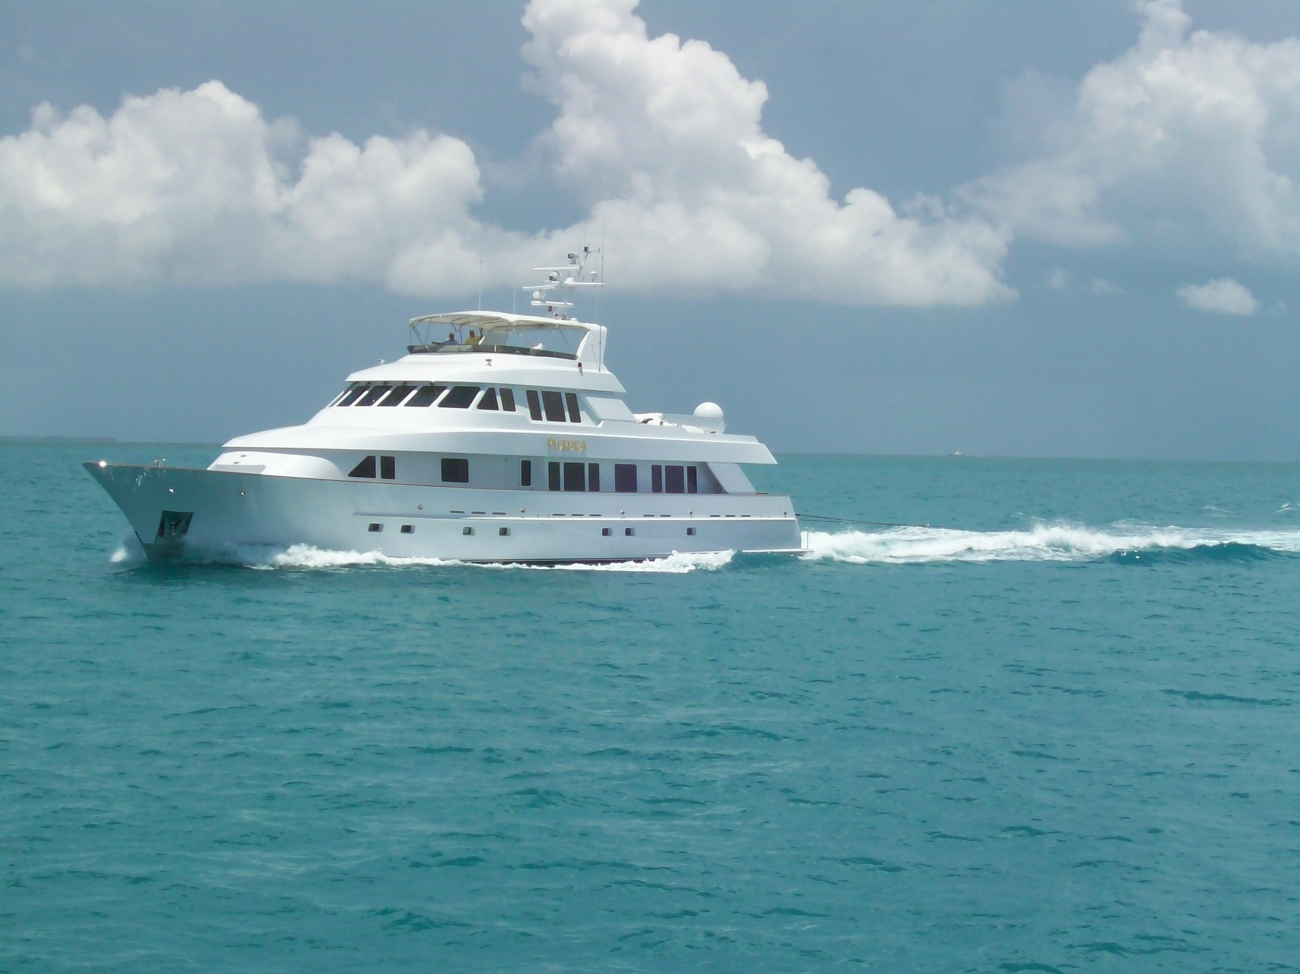 The yacht PHAEDRA off of Key West